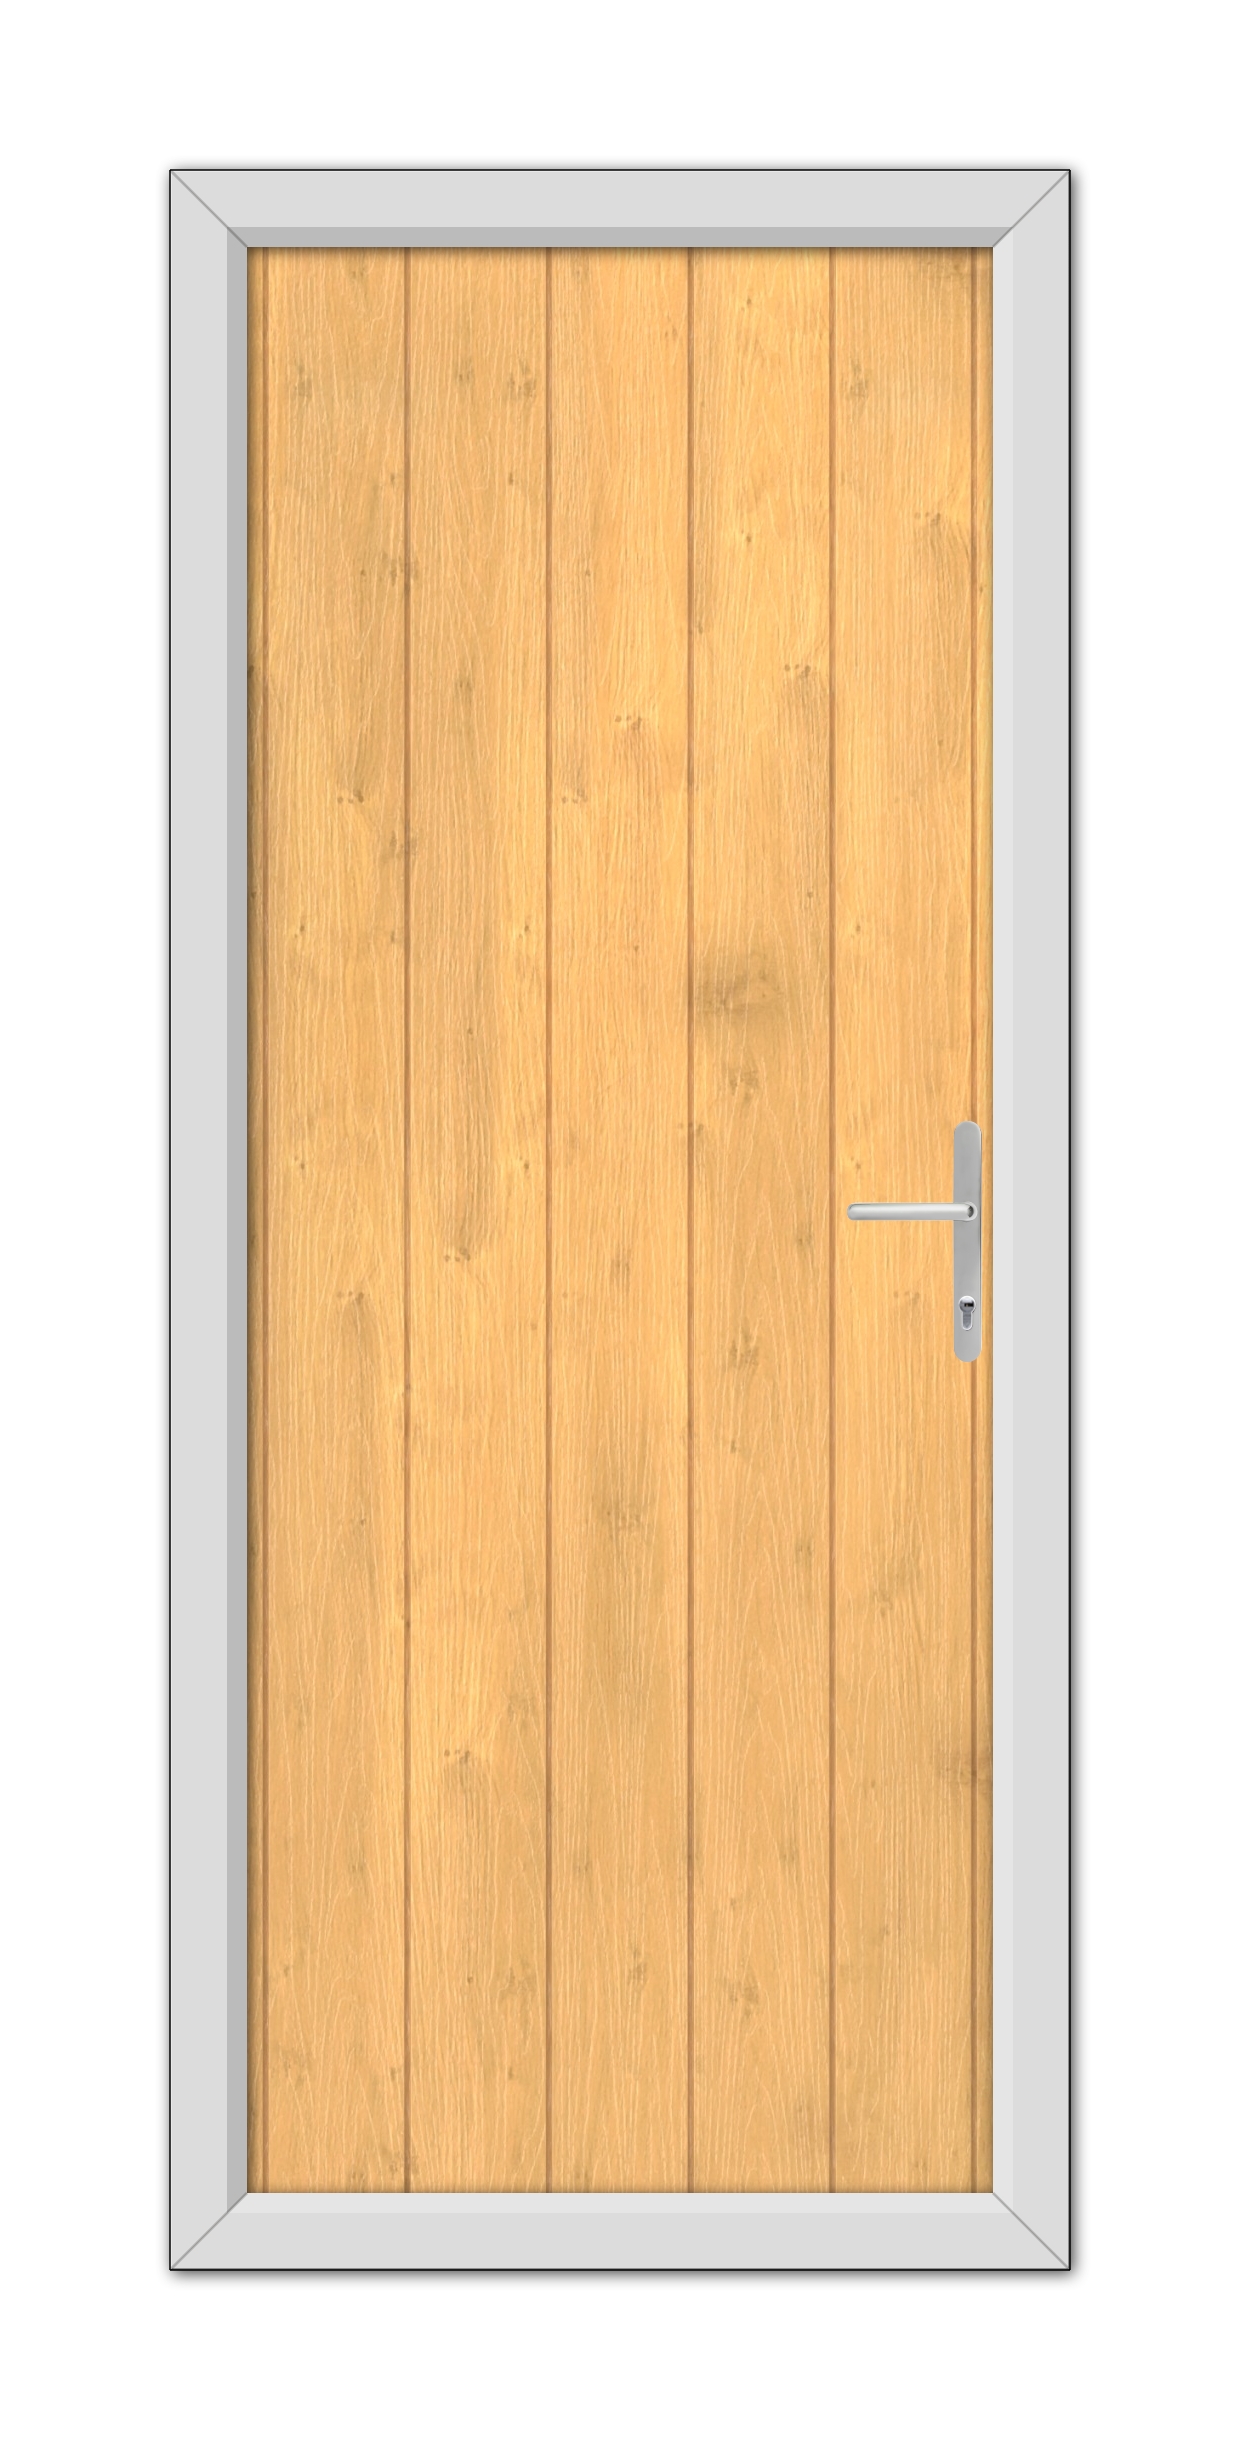 Irish Oak Gloucester composite door with a metal handle, set in a gray frame, viewed from the front.